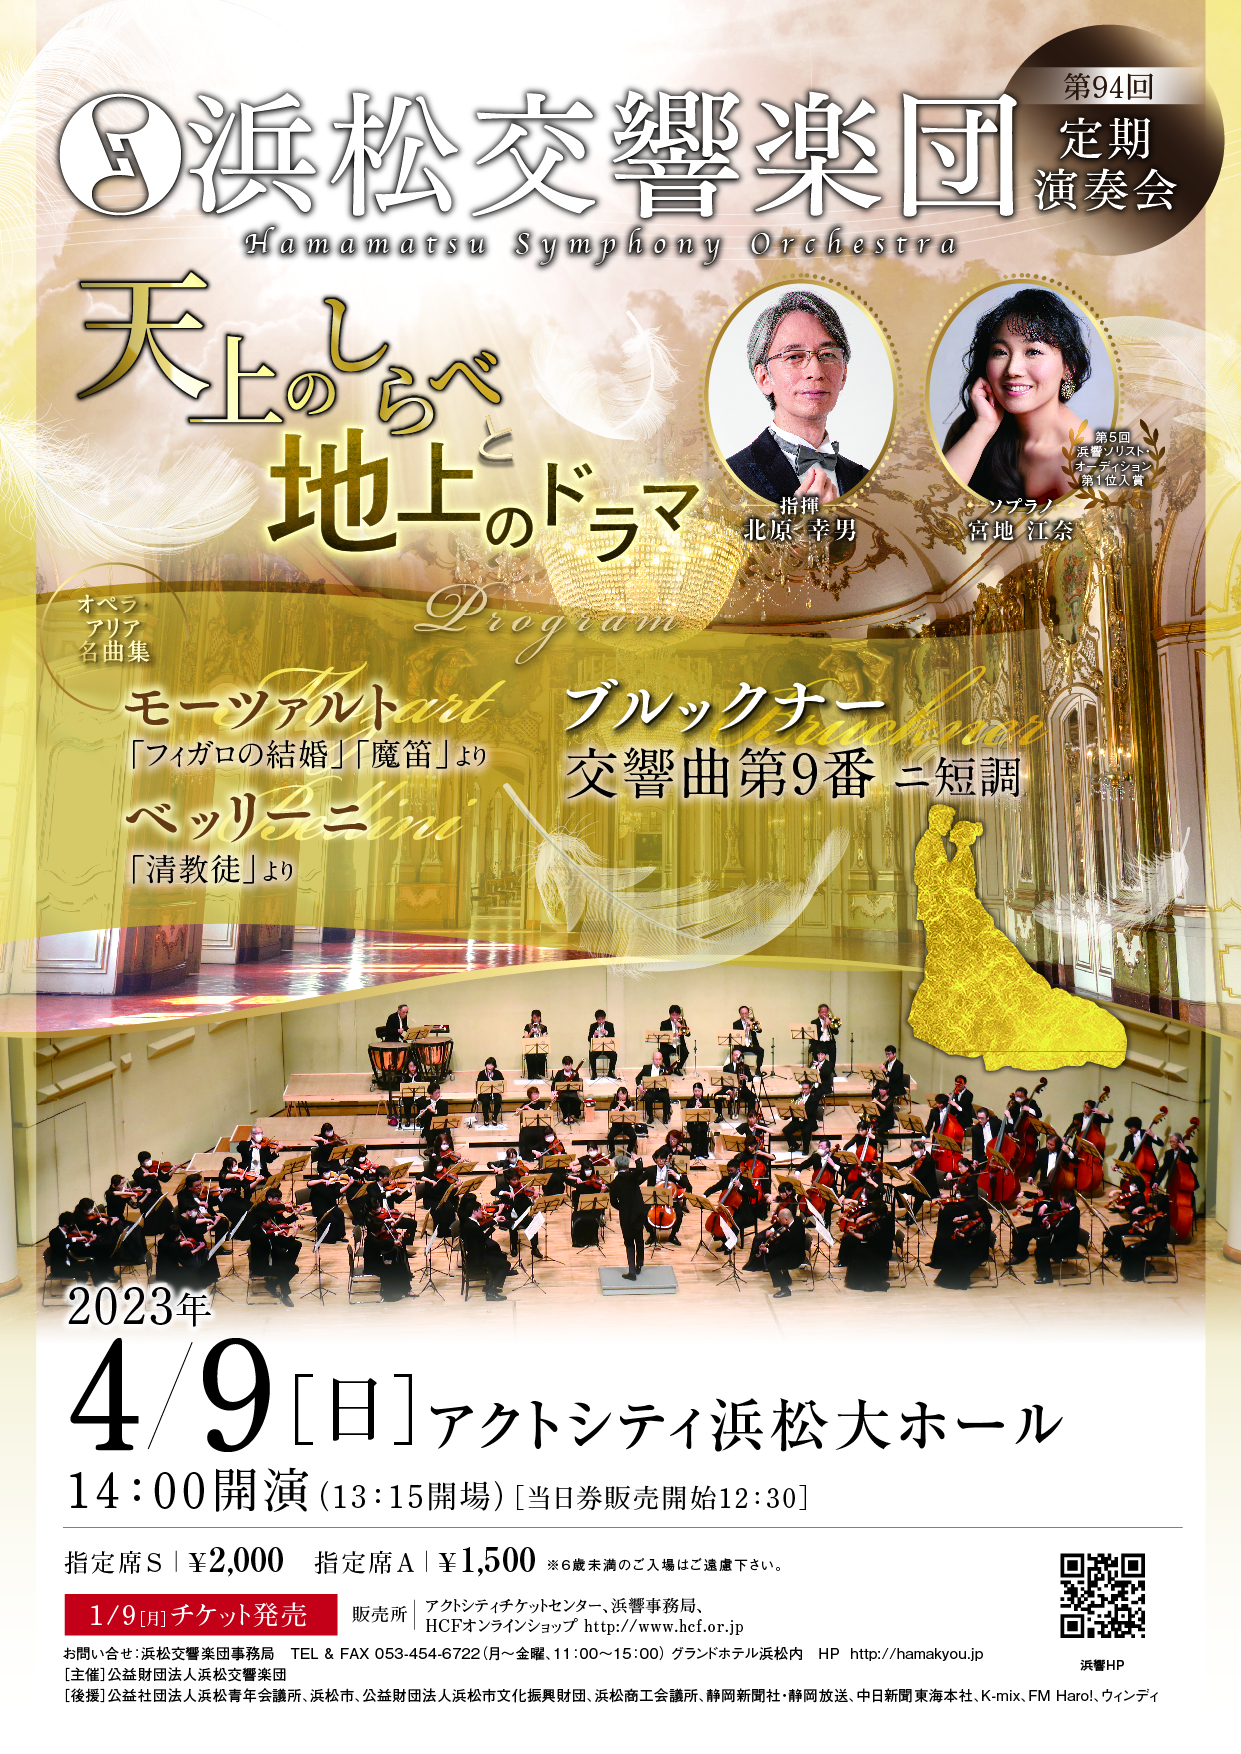 Hamamatsu Symphony Orchestra The 94th Subscription Concert